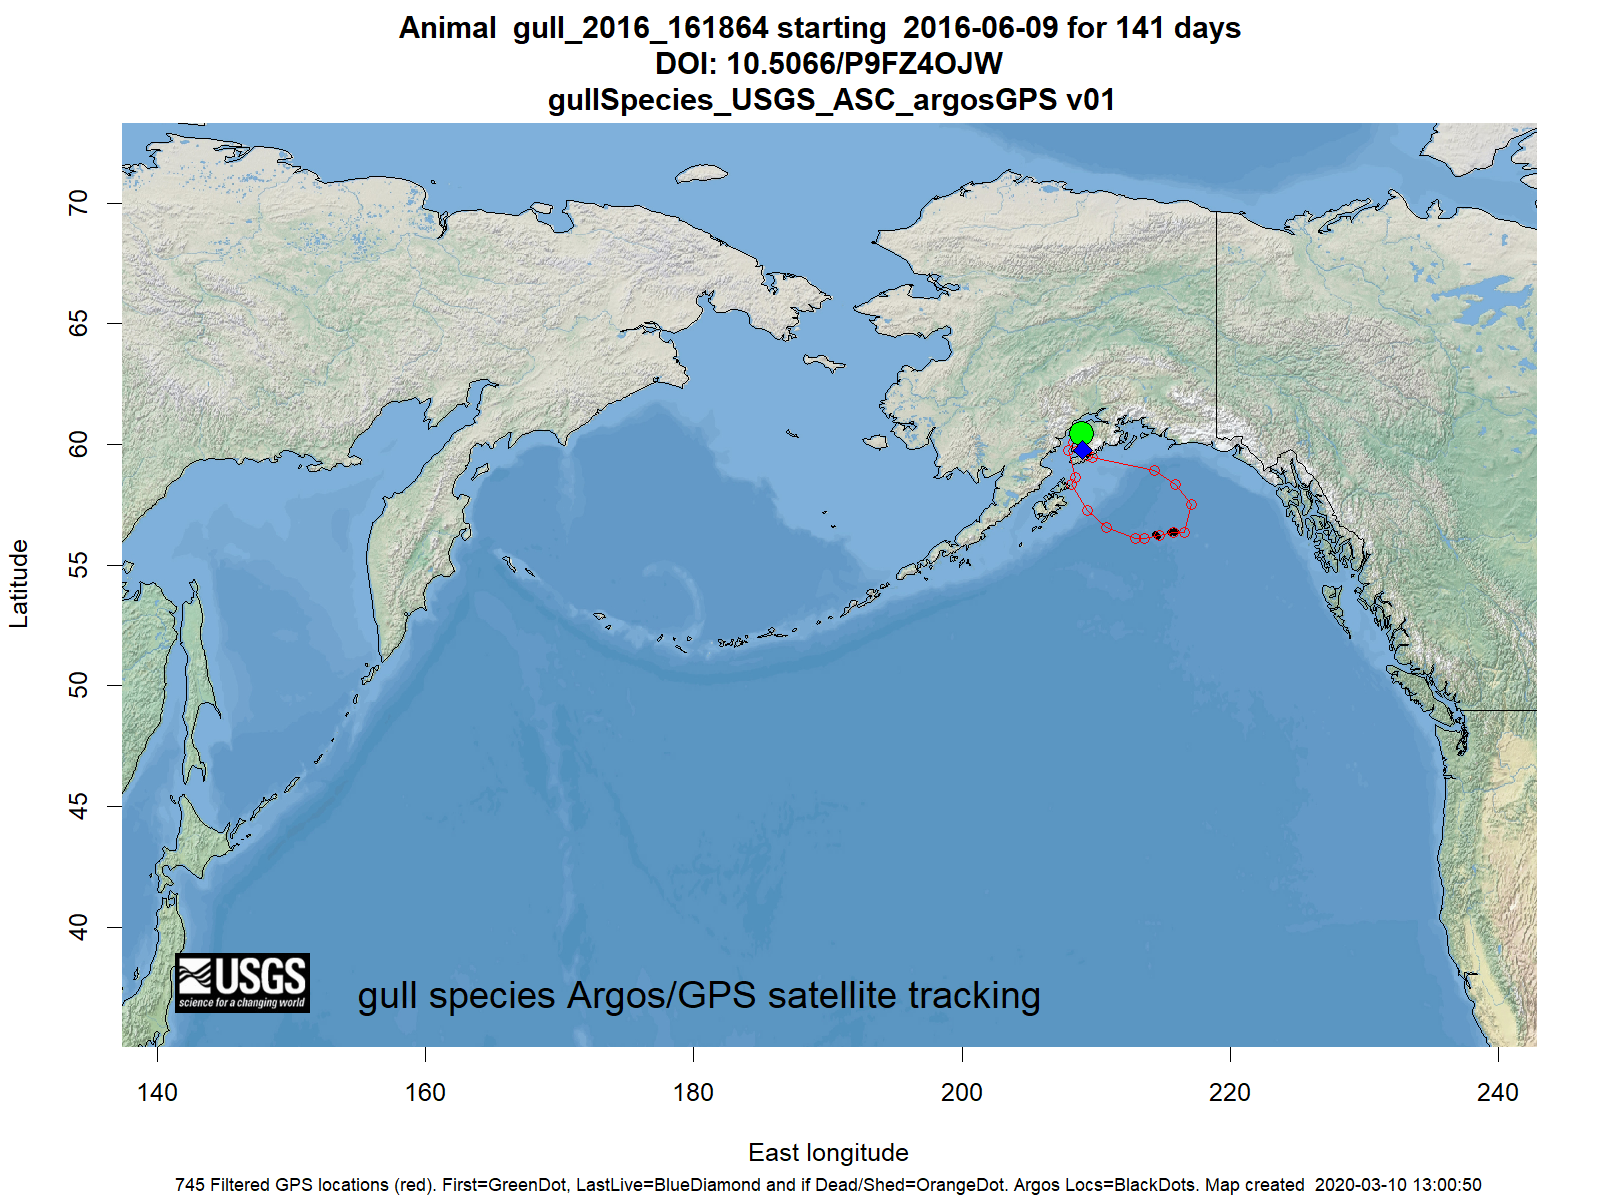 Tracking map for species gull_2016_161864